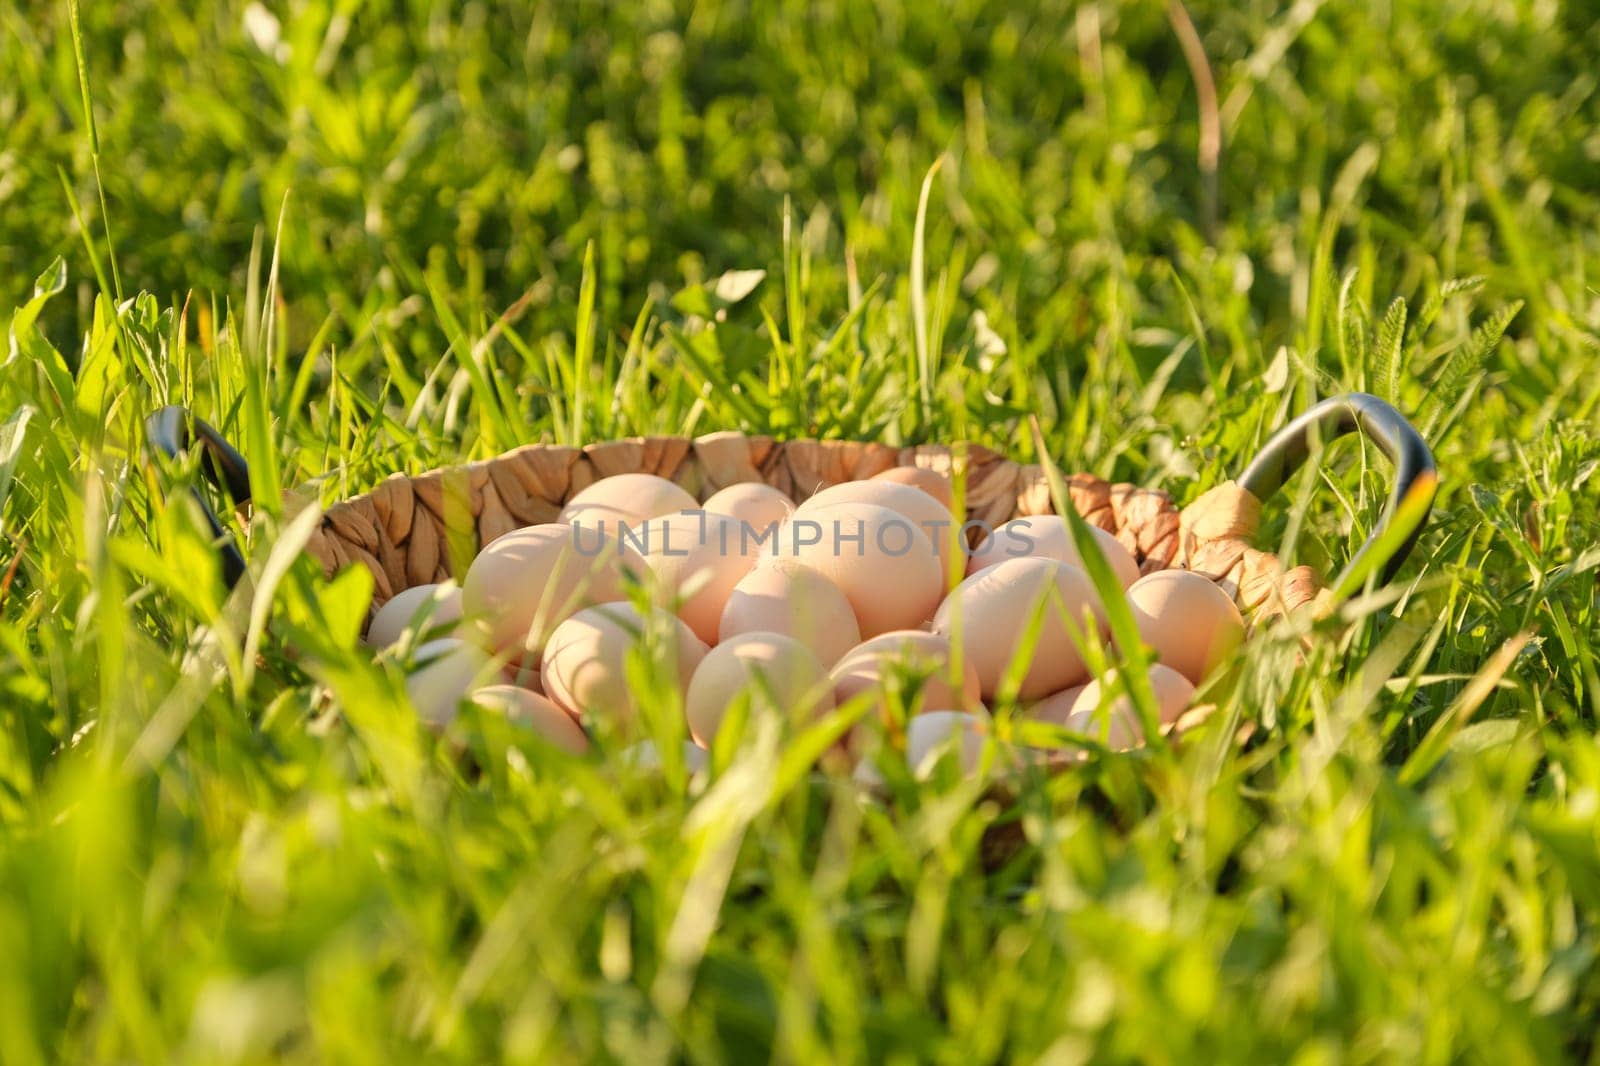 Farm fresh chicken eggs in basket on the grass in nature, healthy natural food by VH-studio